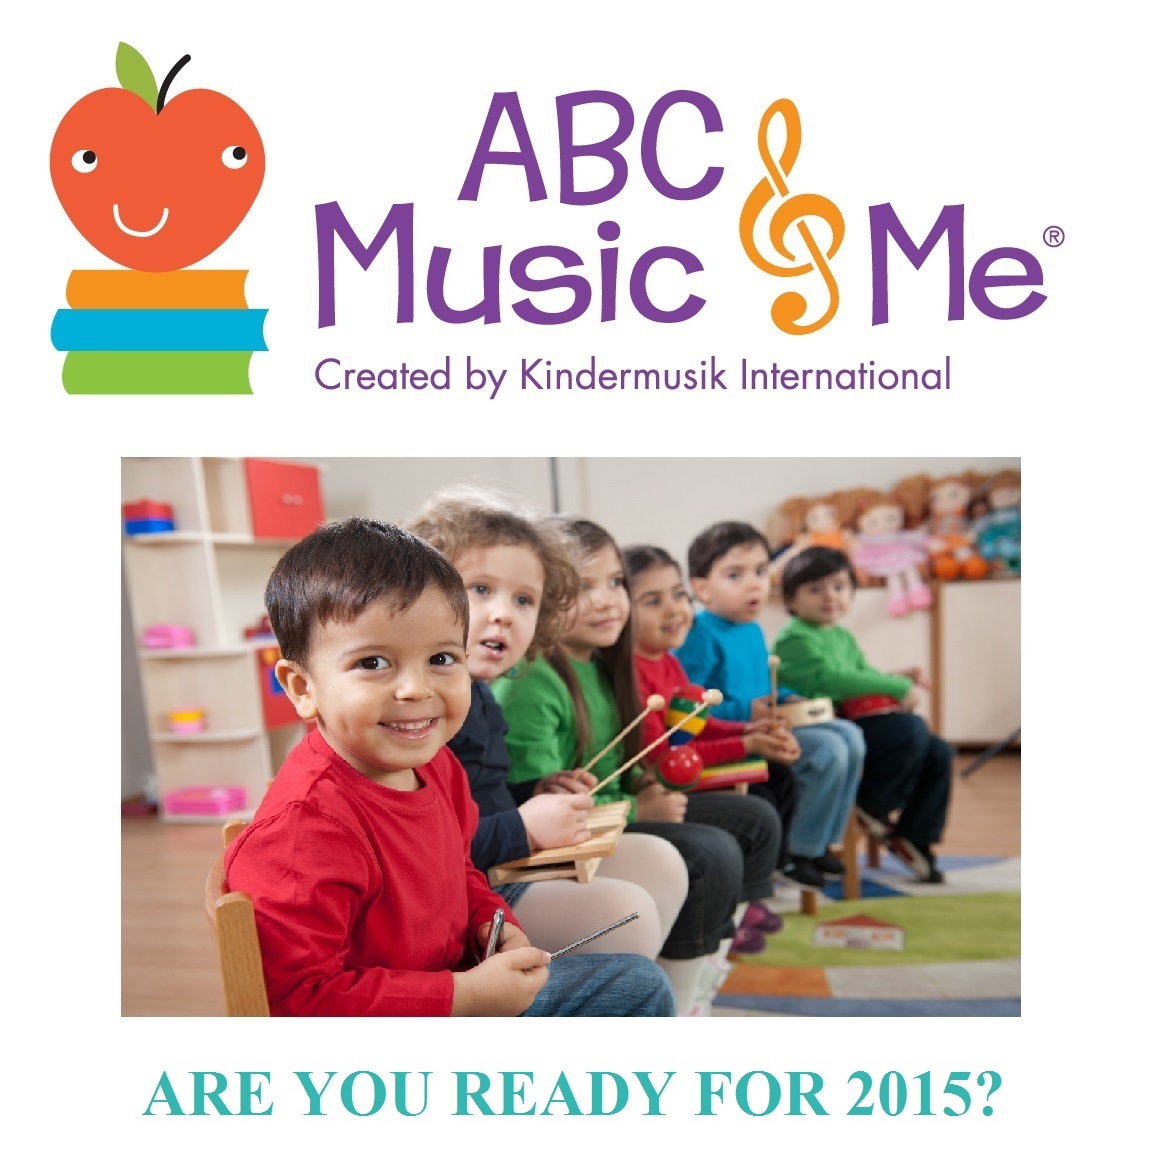 ABC with Kids 2015